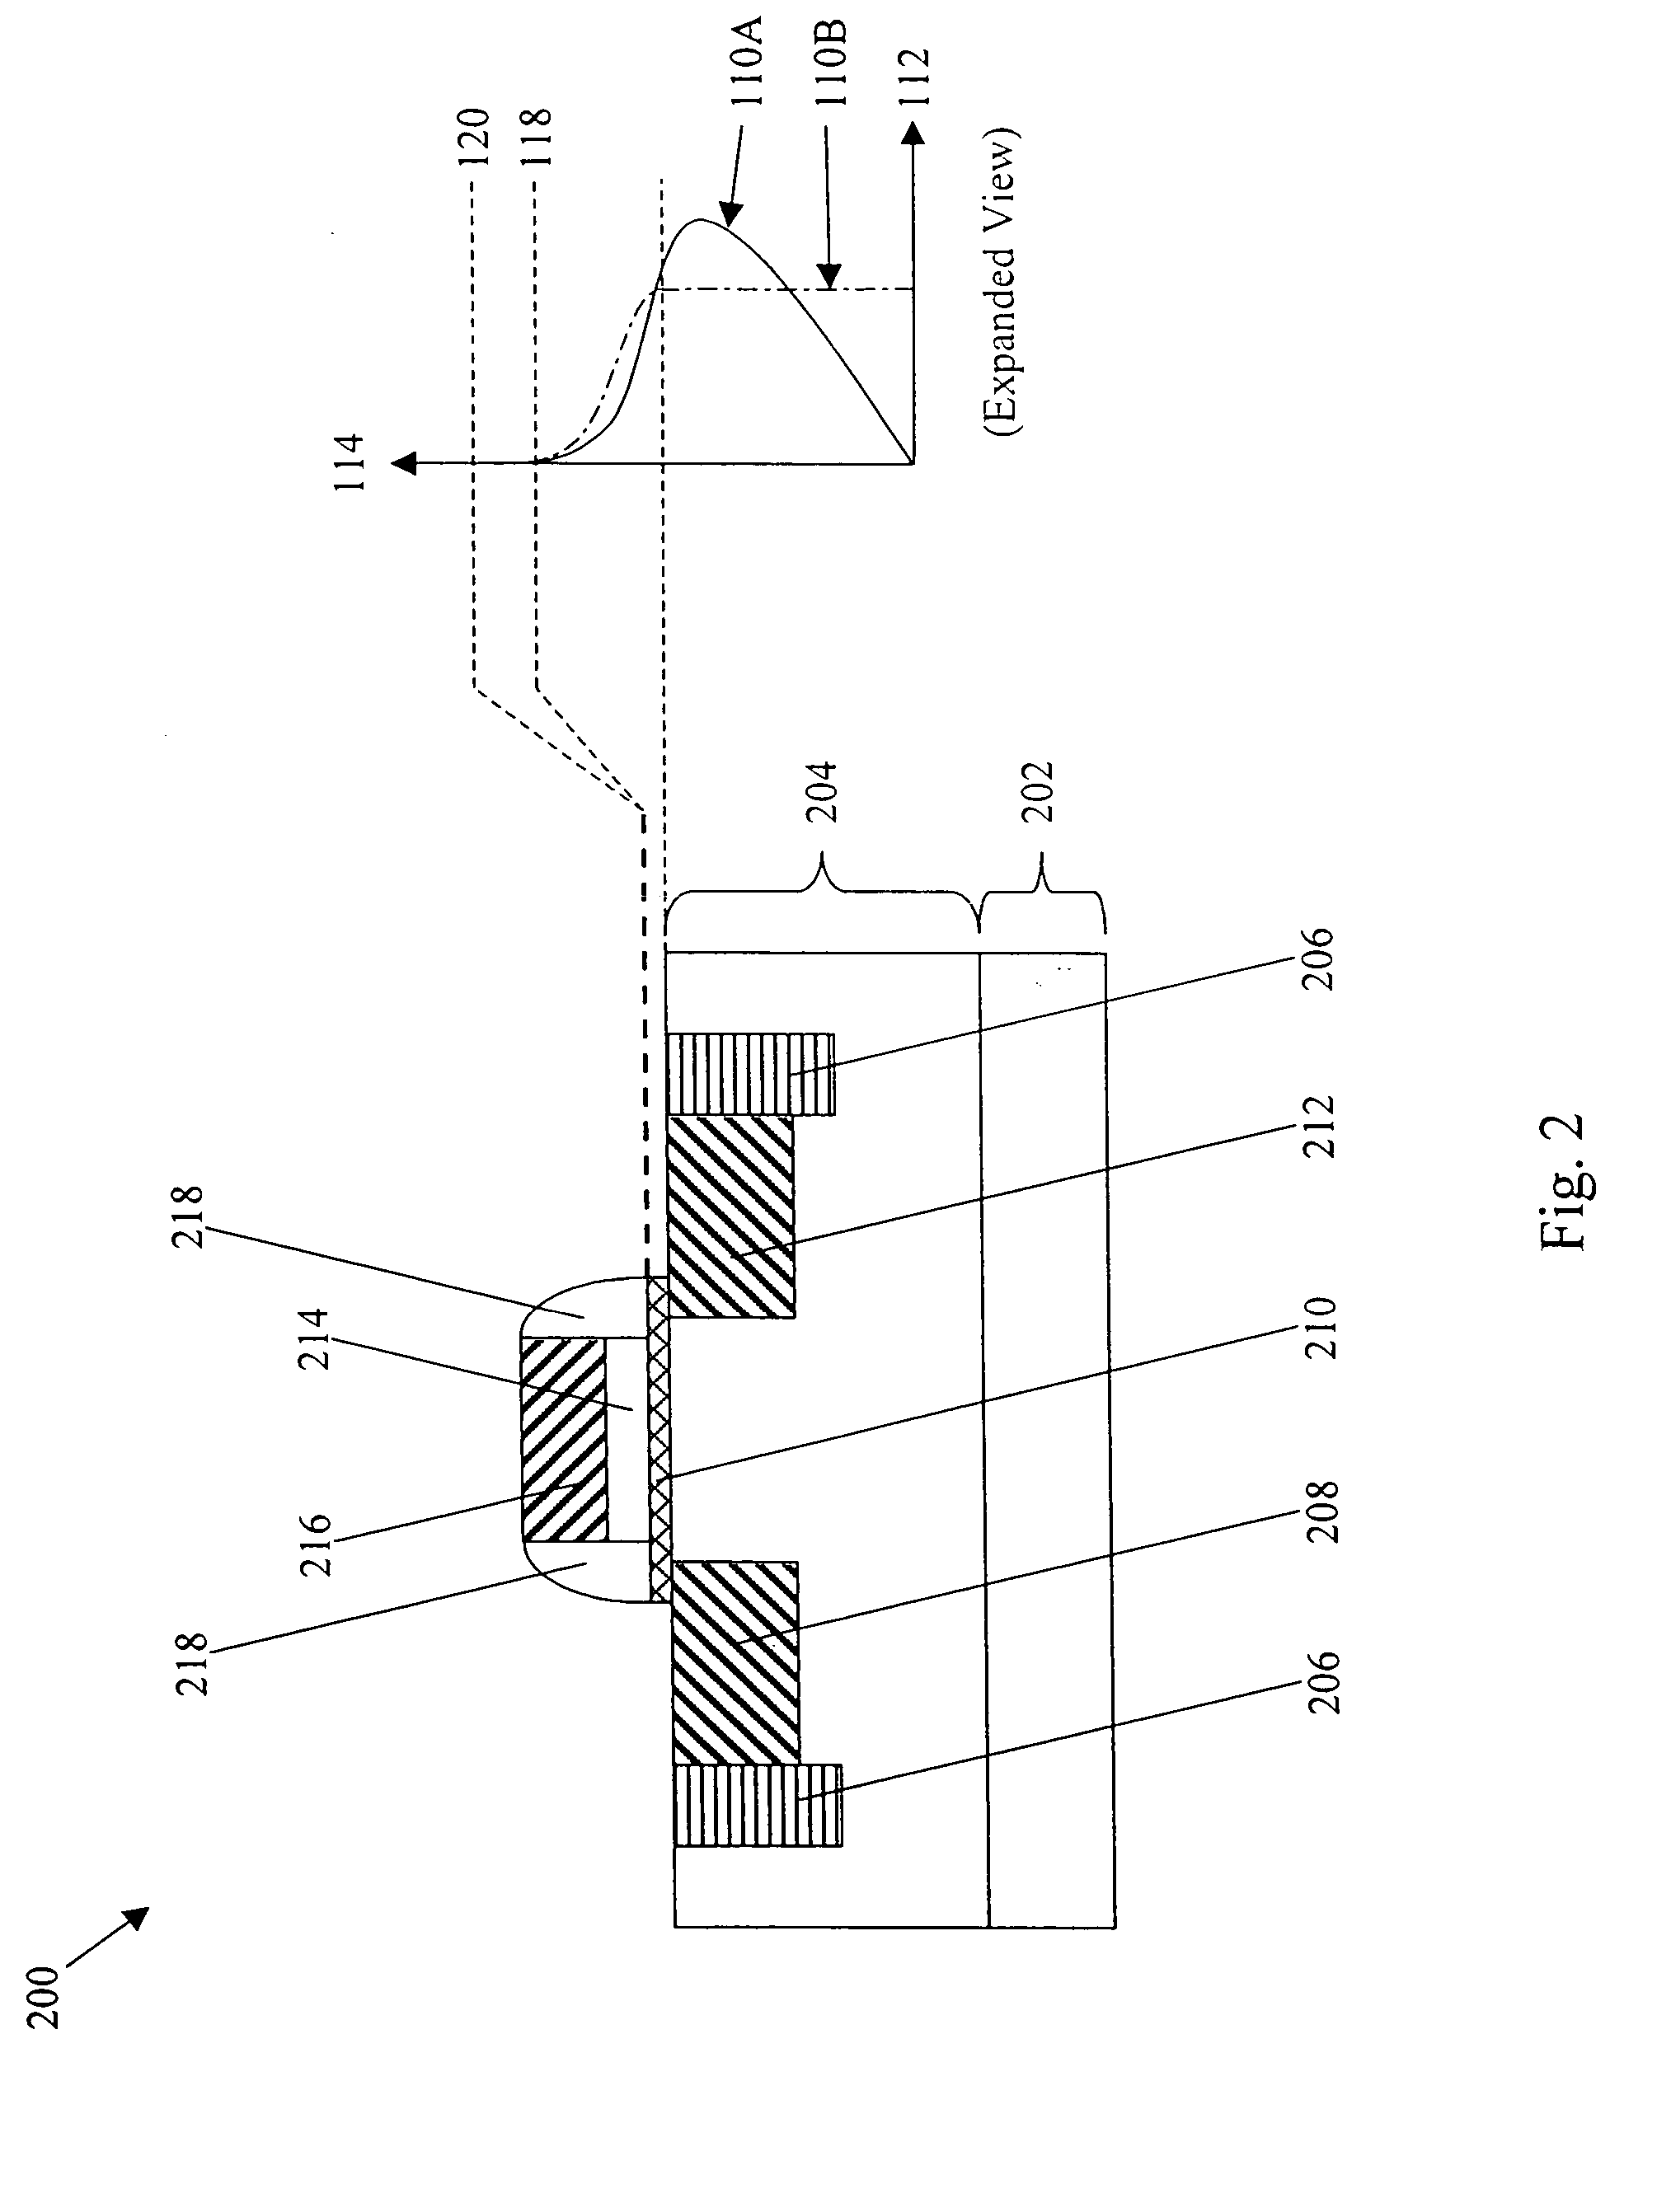 Semiconductor structures employing strained material layers with defined impurity gradients and methods for fabricating same